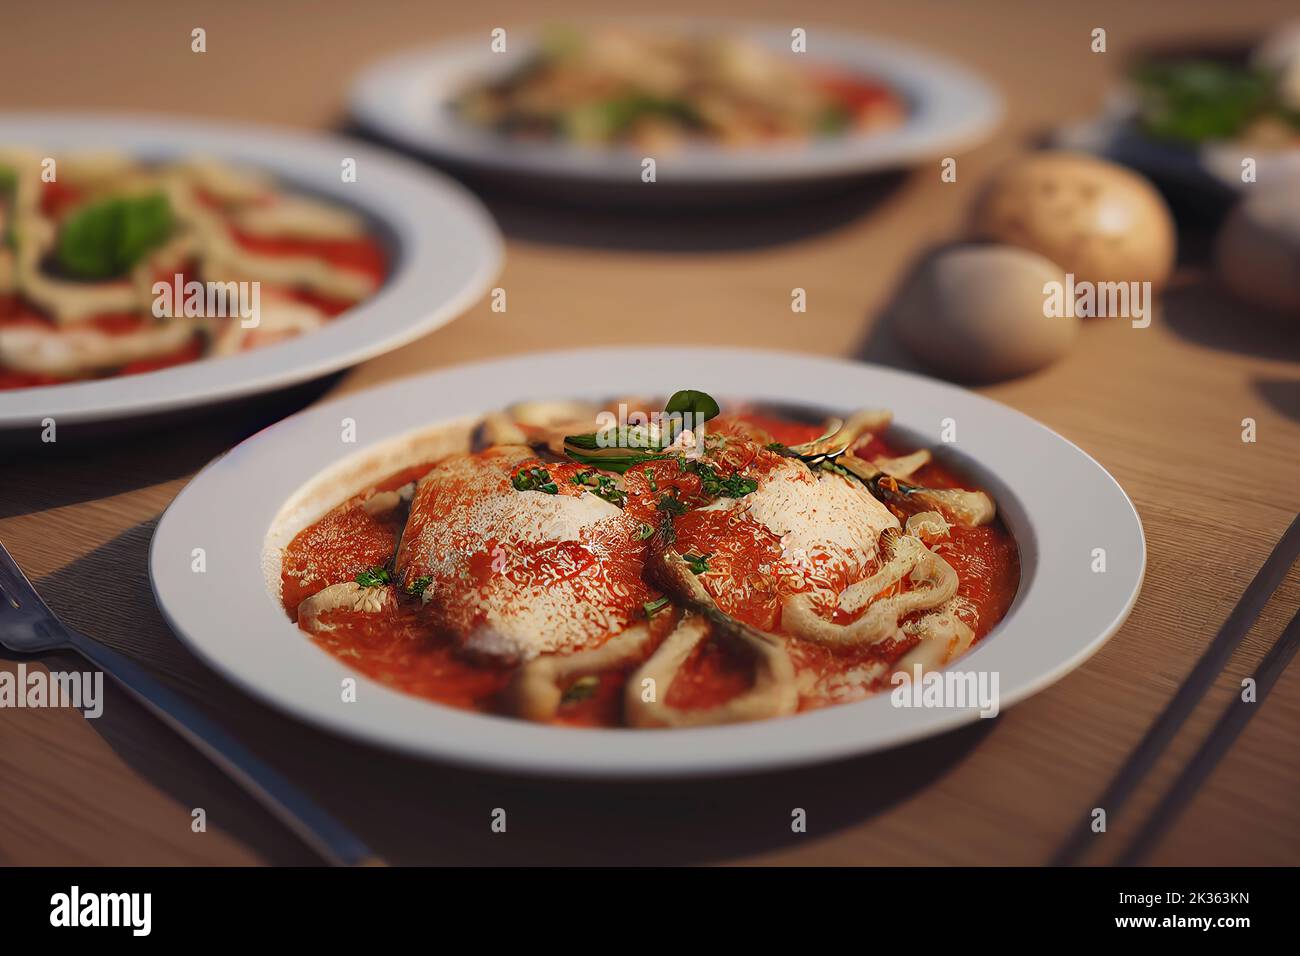 Italian pasta in red tomato sauce with chicken and basil, light background, selective focus, food photography and illustration Stock Photo